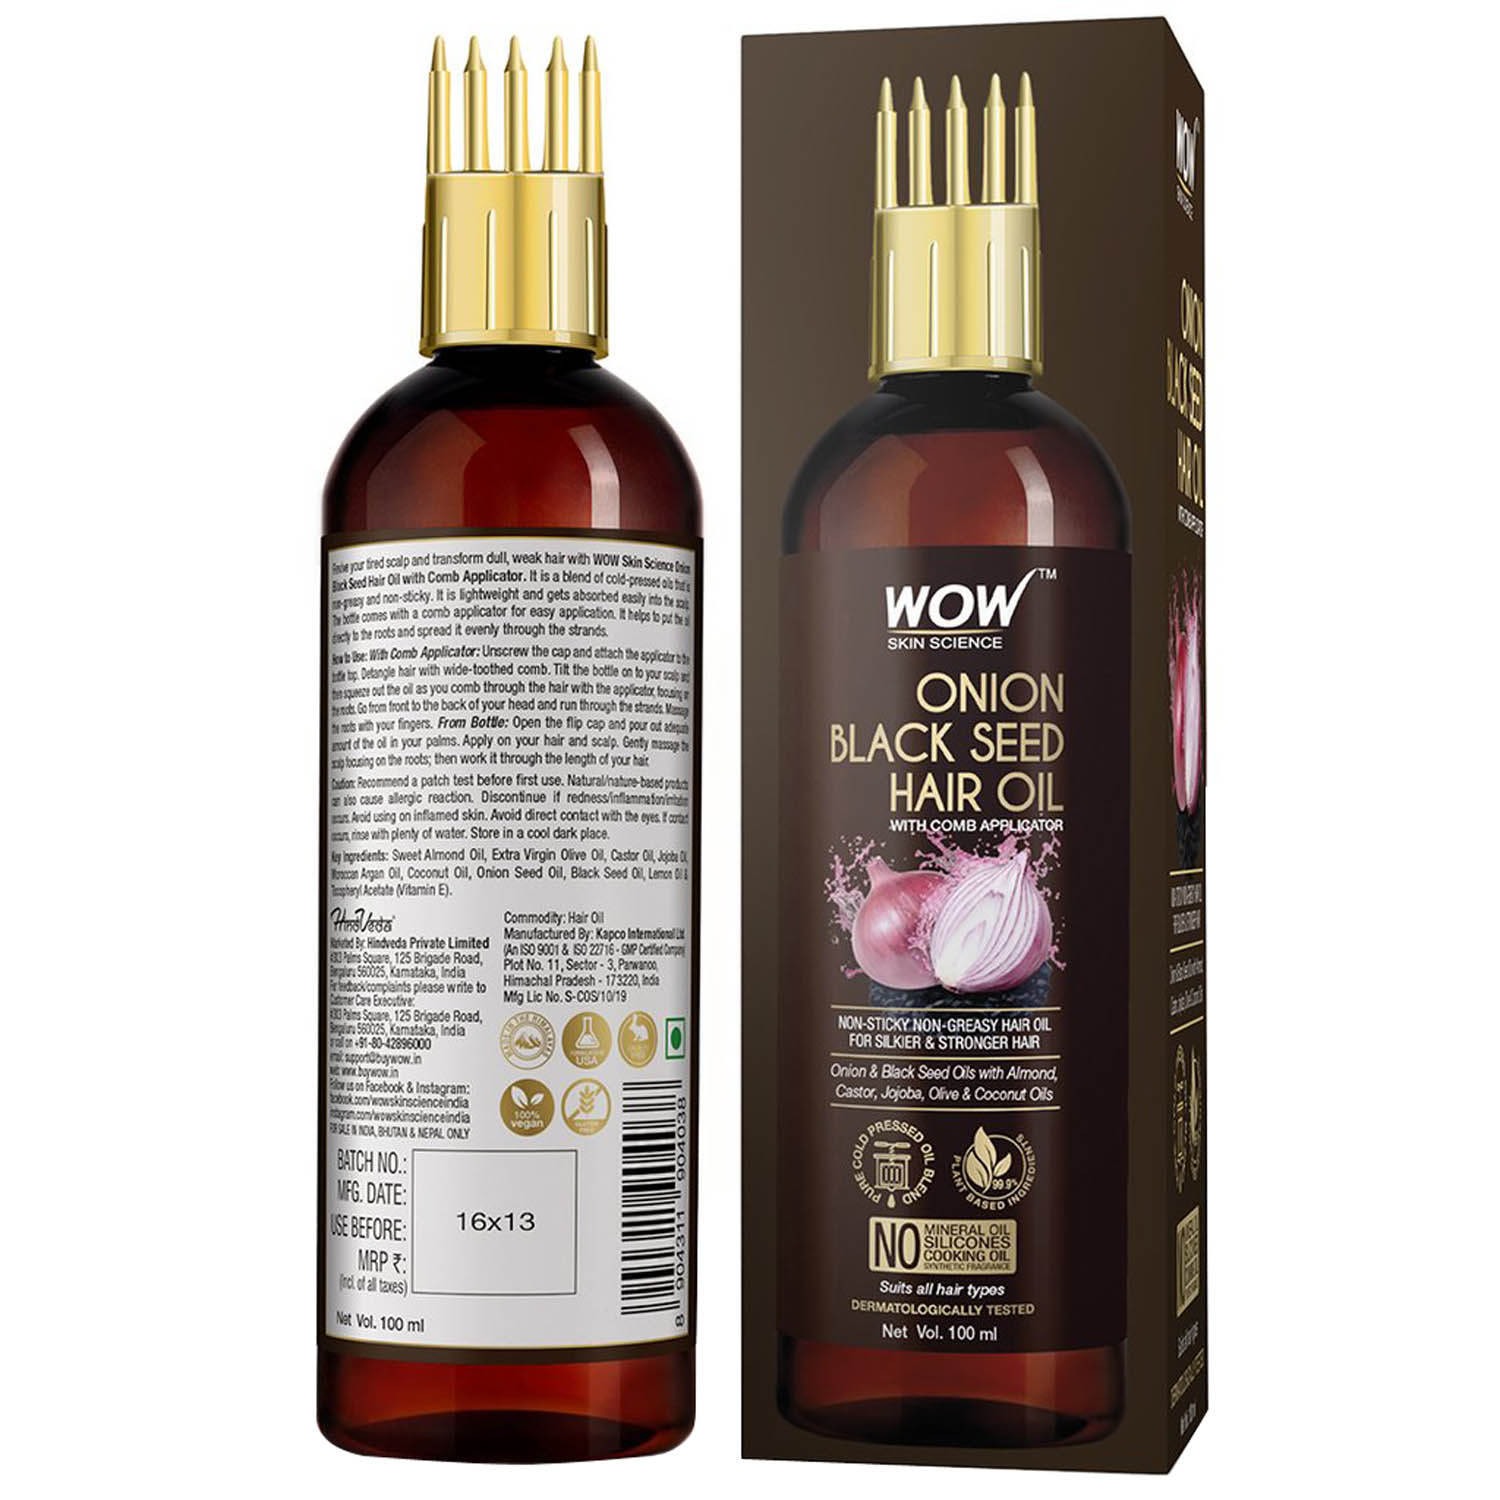 Buy WOW Skin Science Onion Hair Oil With Black Seed Oil Extracts  Onion Oil  Shampoo Hair Care Kit  Net Vol 500mL Online at Low Prices in India   Amazonin